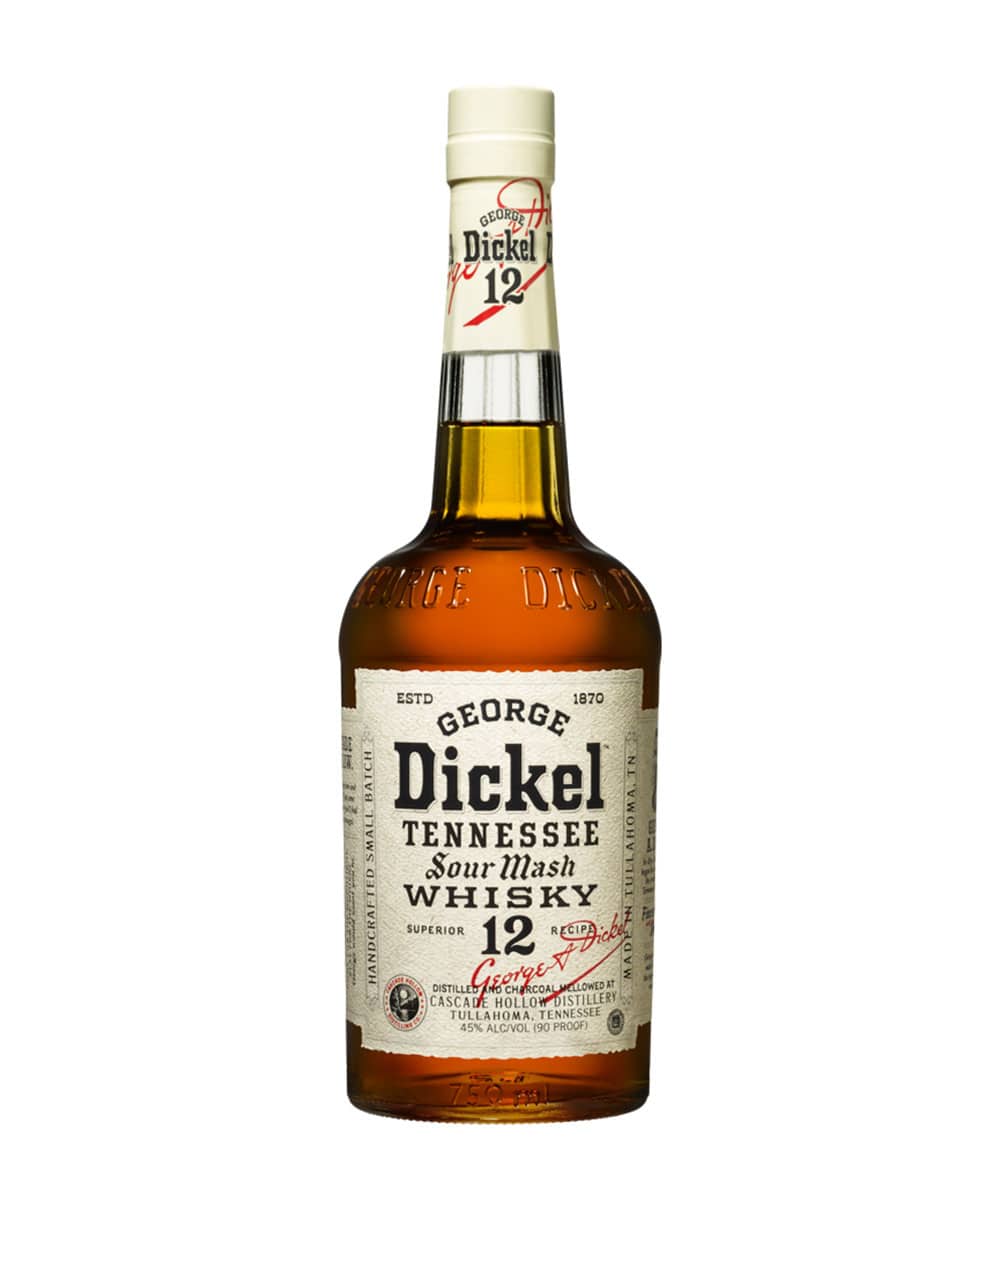 George Dickel 12 Tennessee Sour Mash Whisky 1.75L